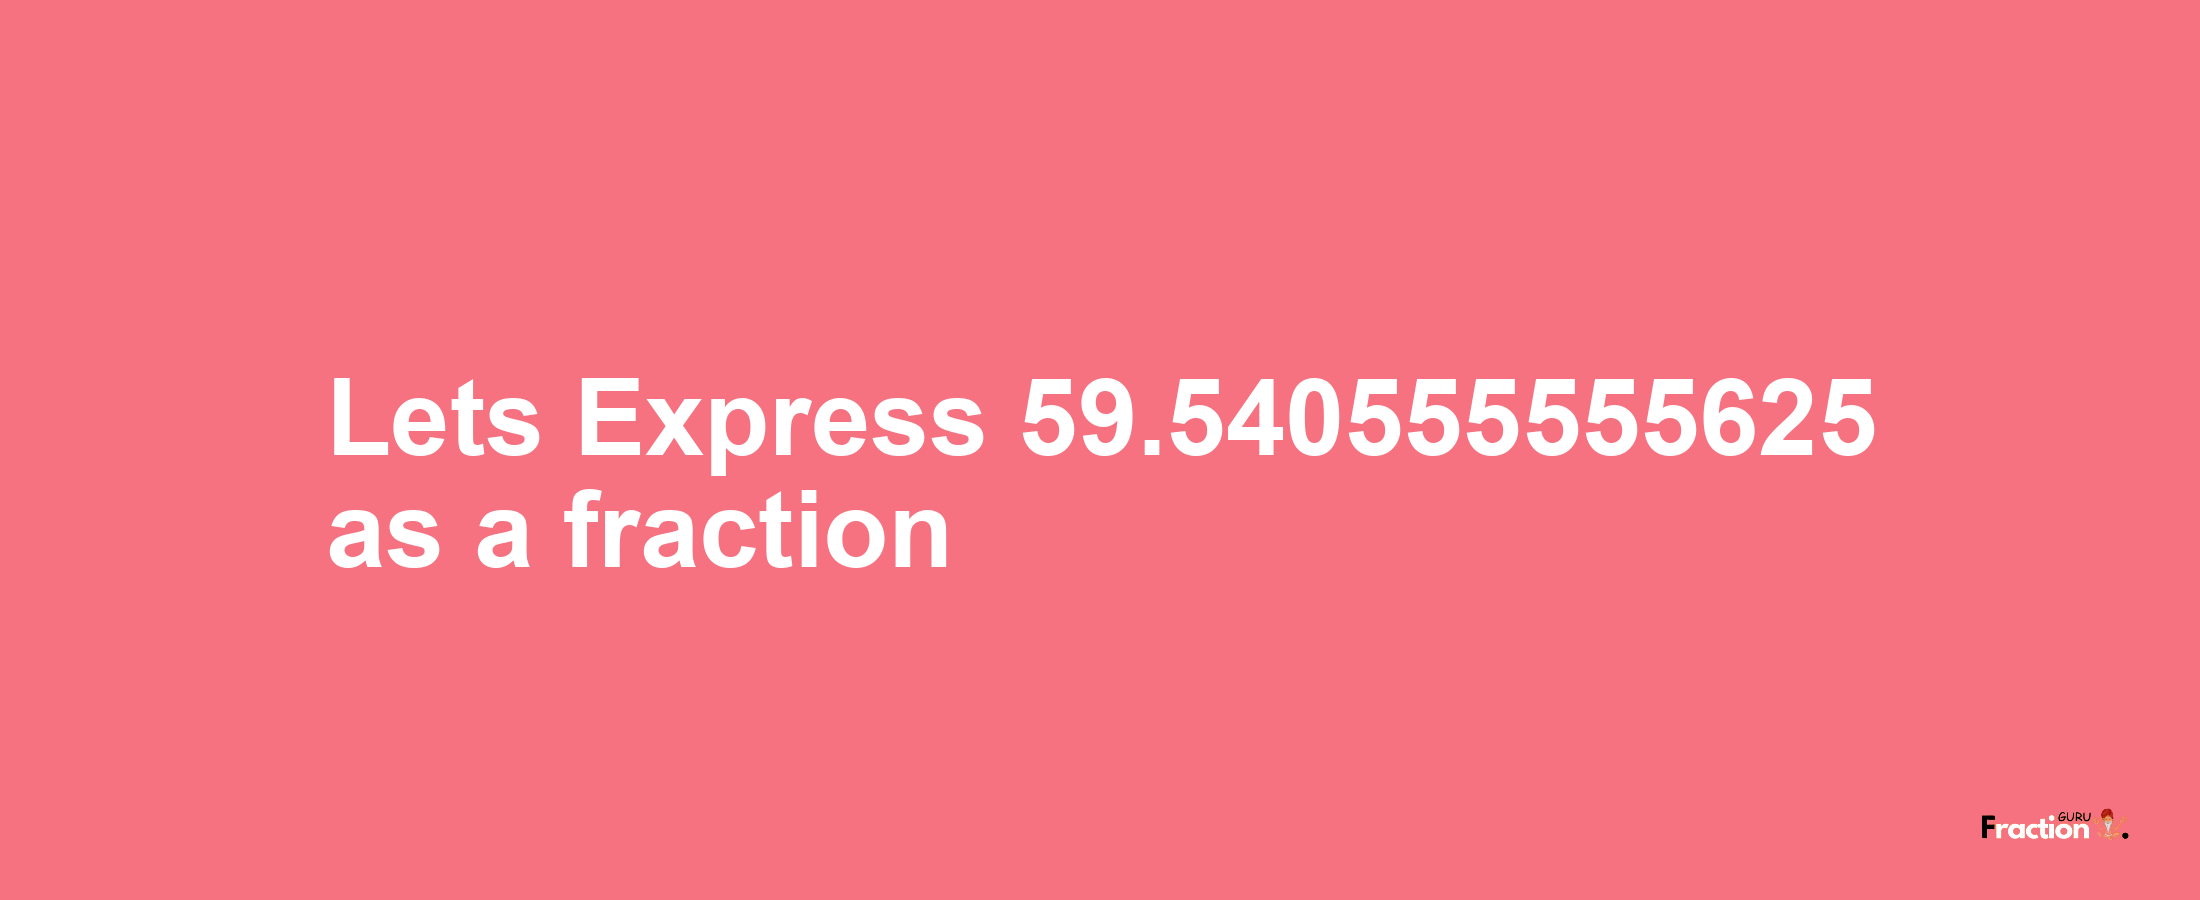 Lets Express 59.540555555625 as afraction